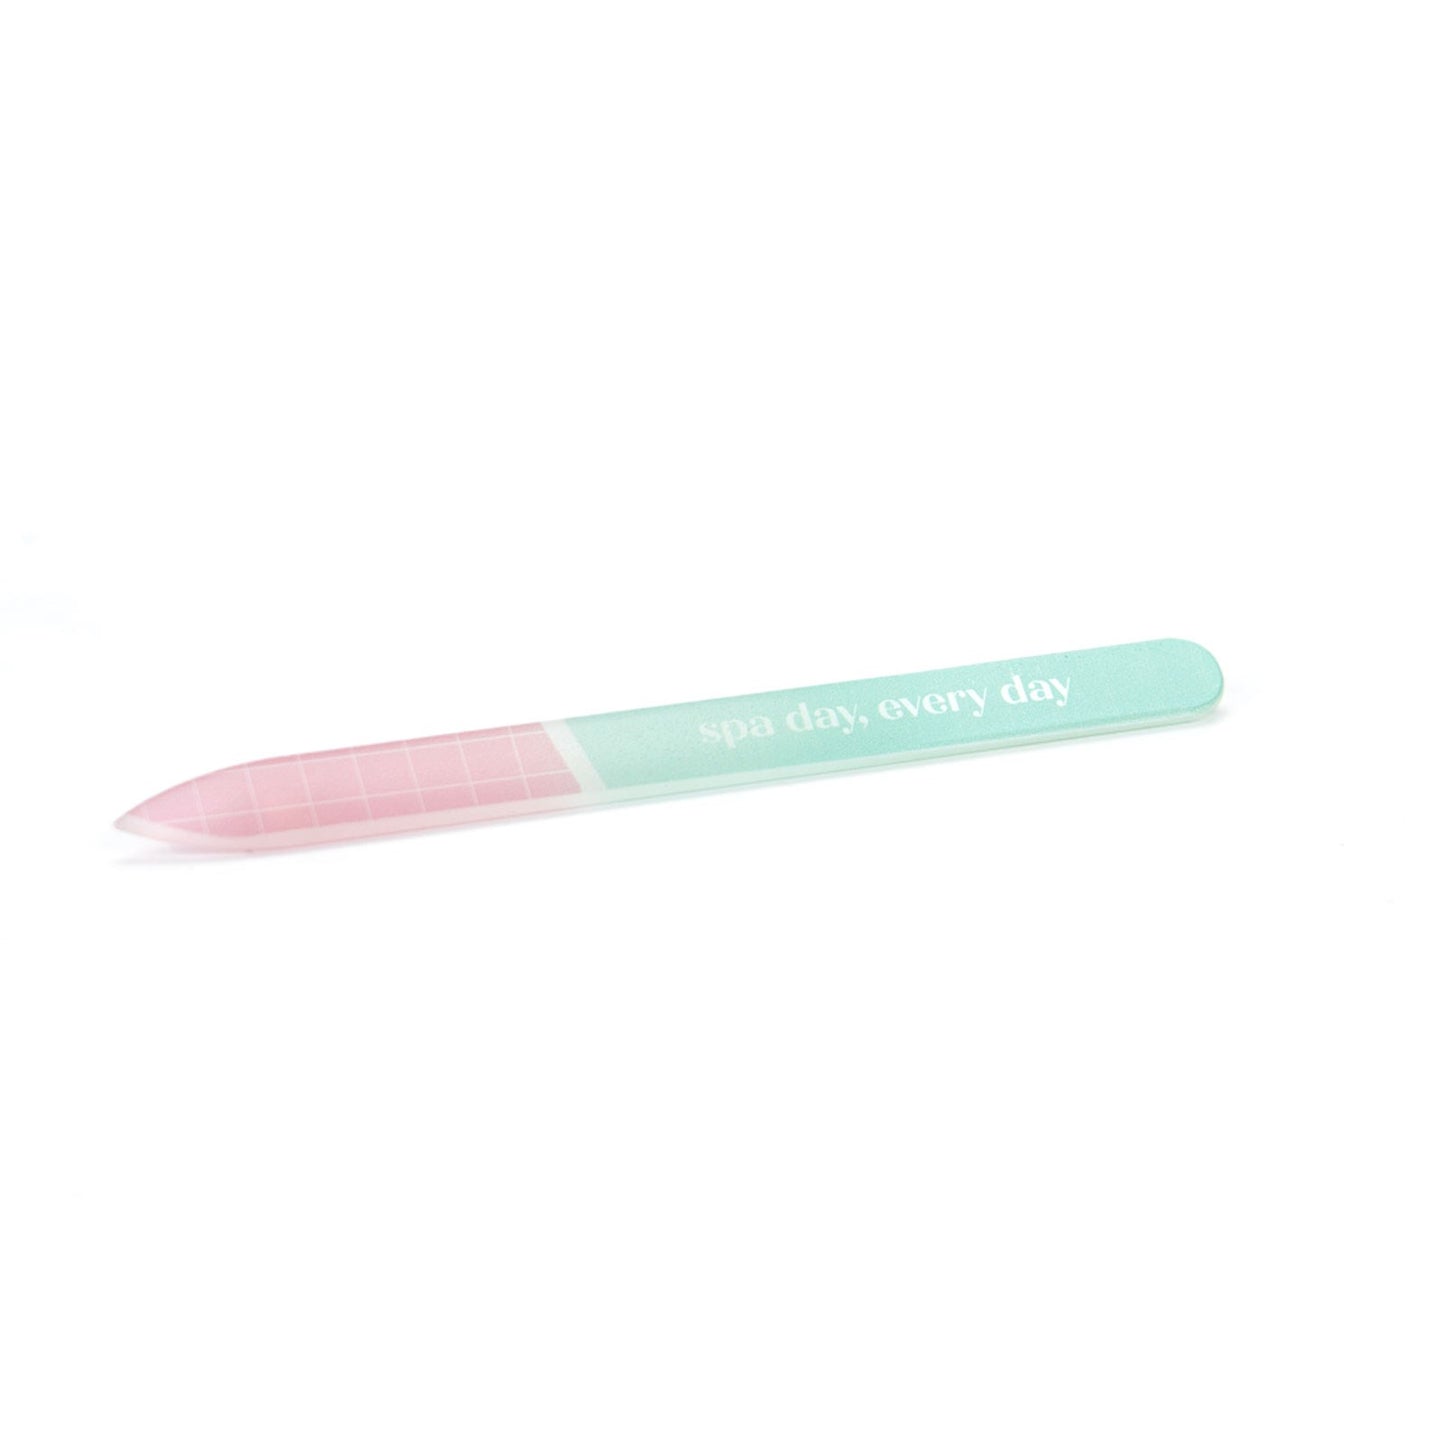 spa day glass nail file on a white background